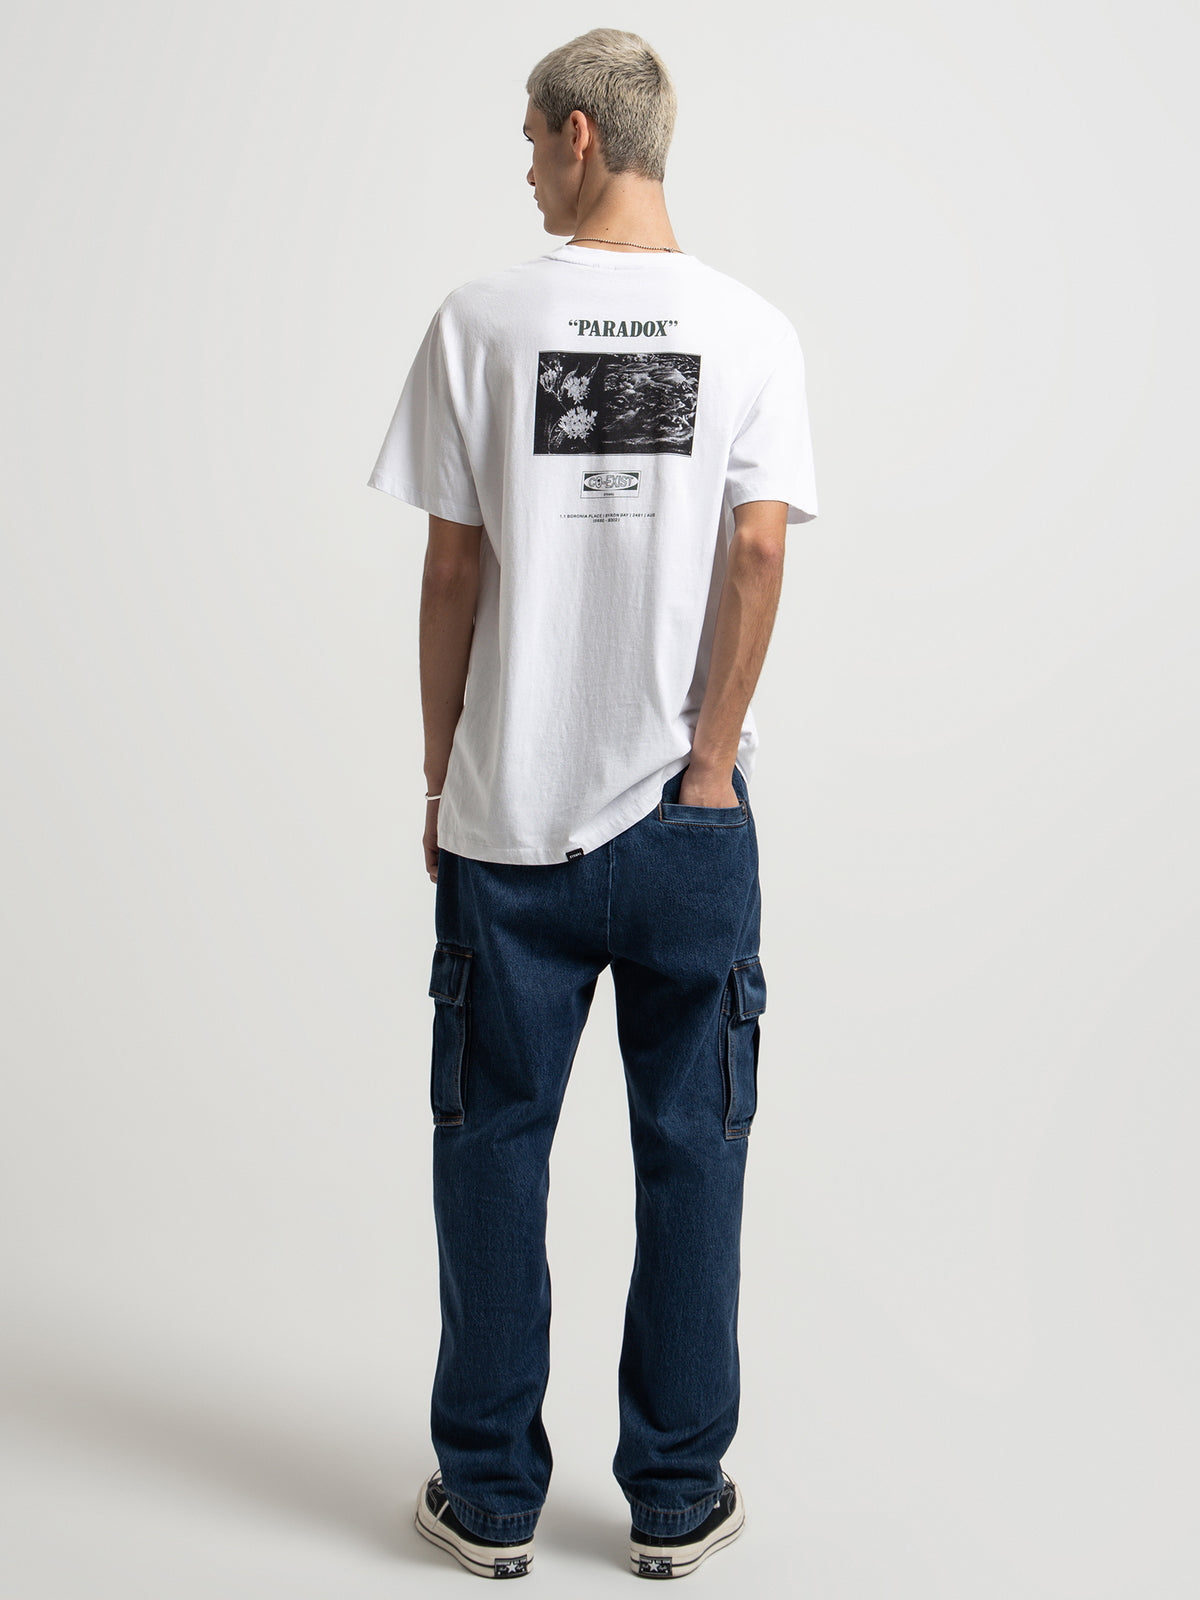 Paradox Merch Fit T-Shirt in White